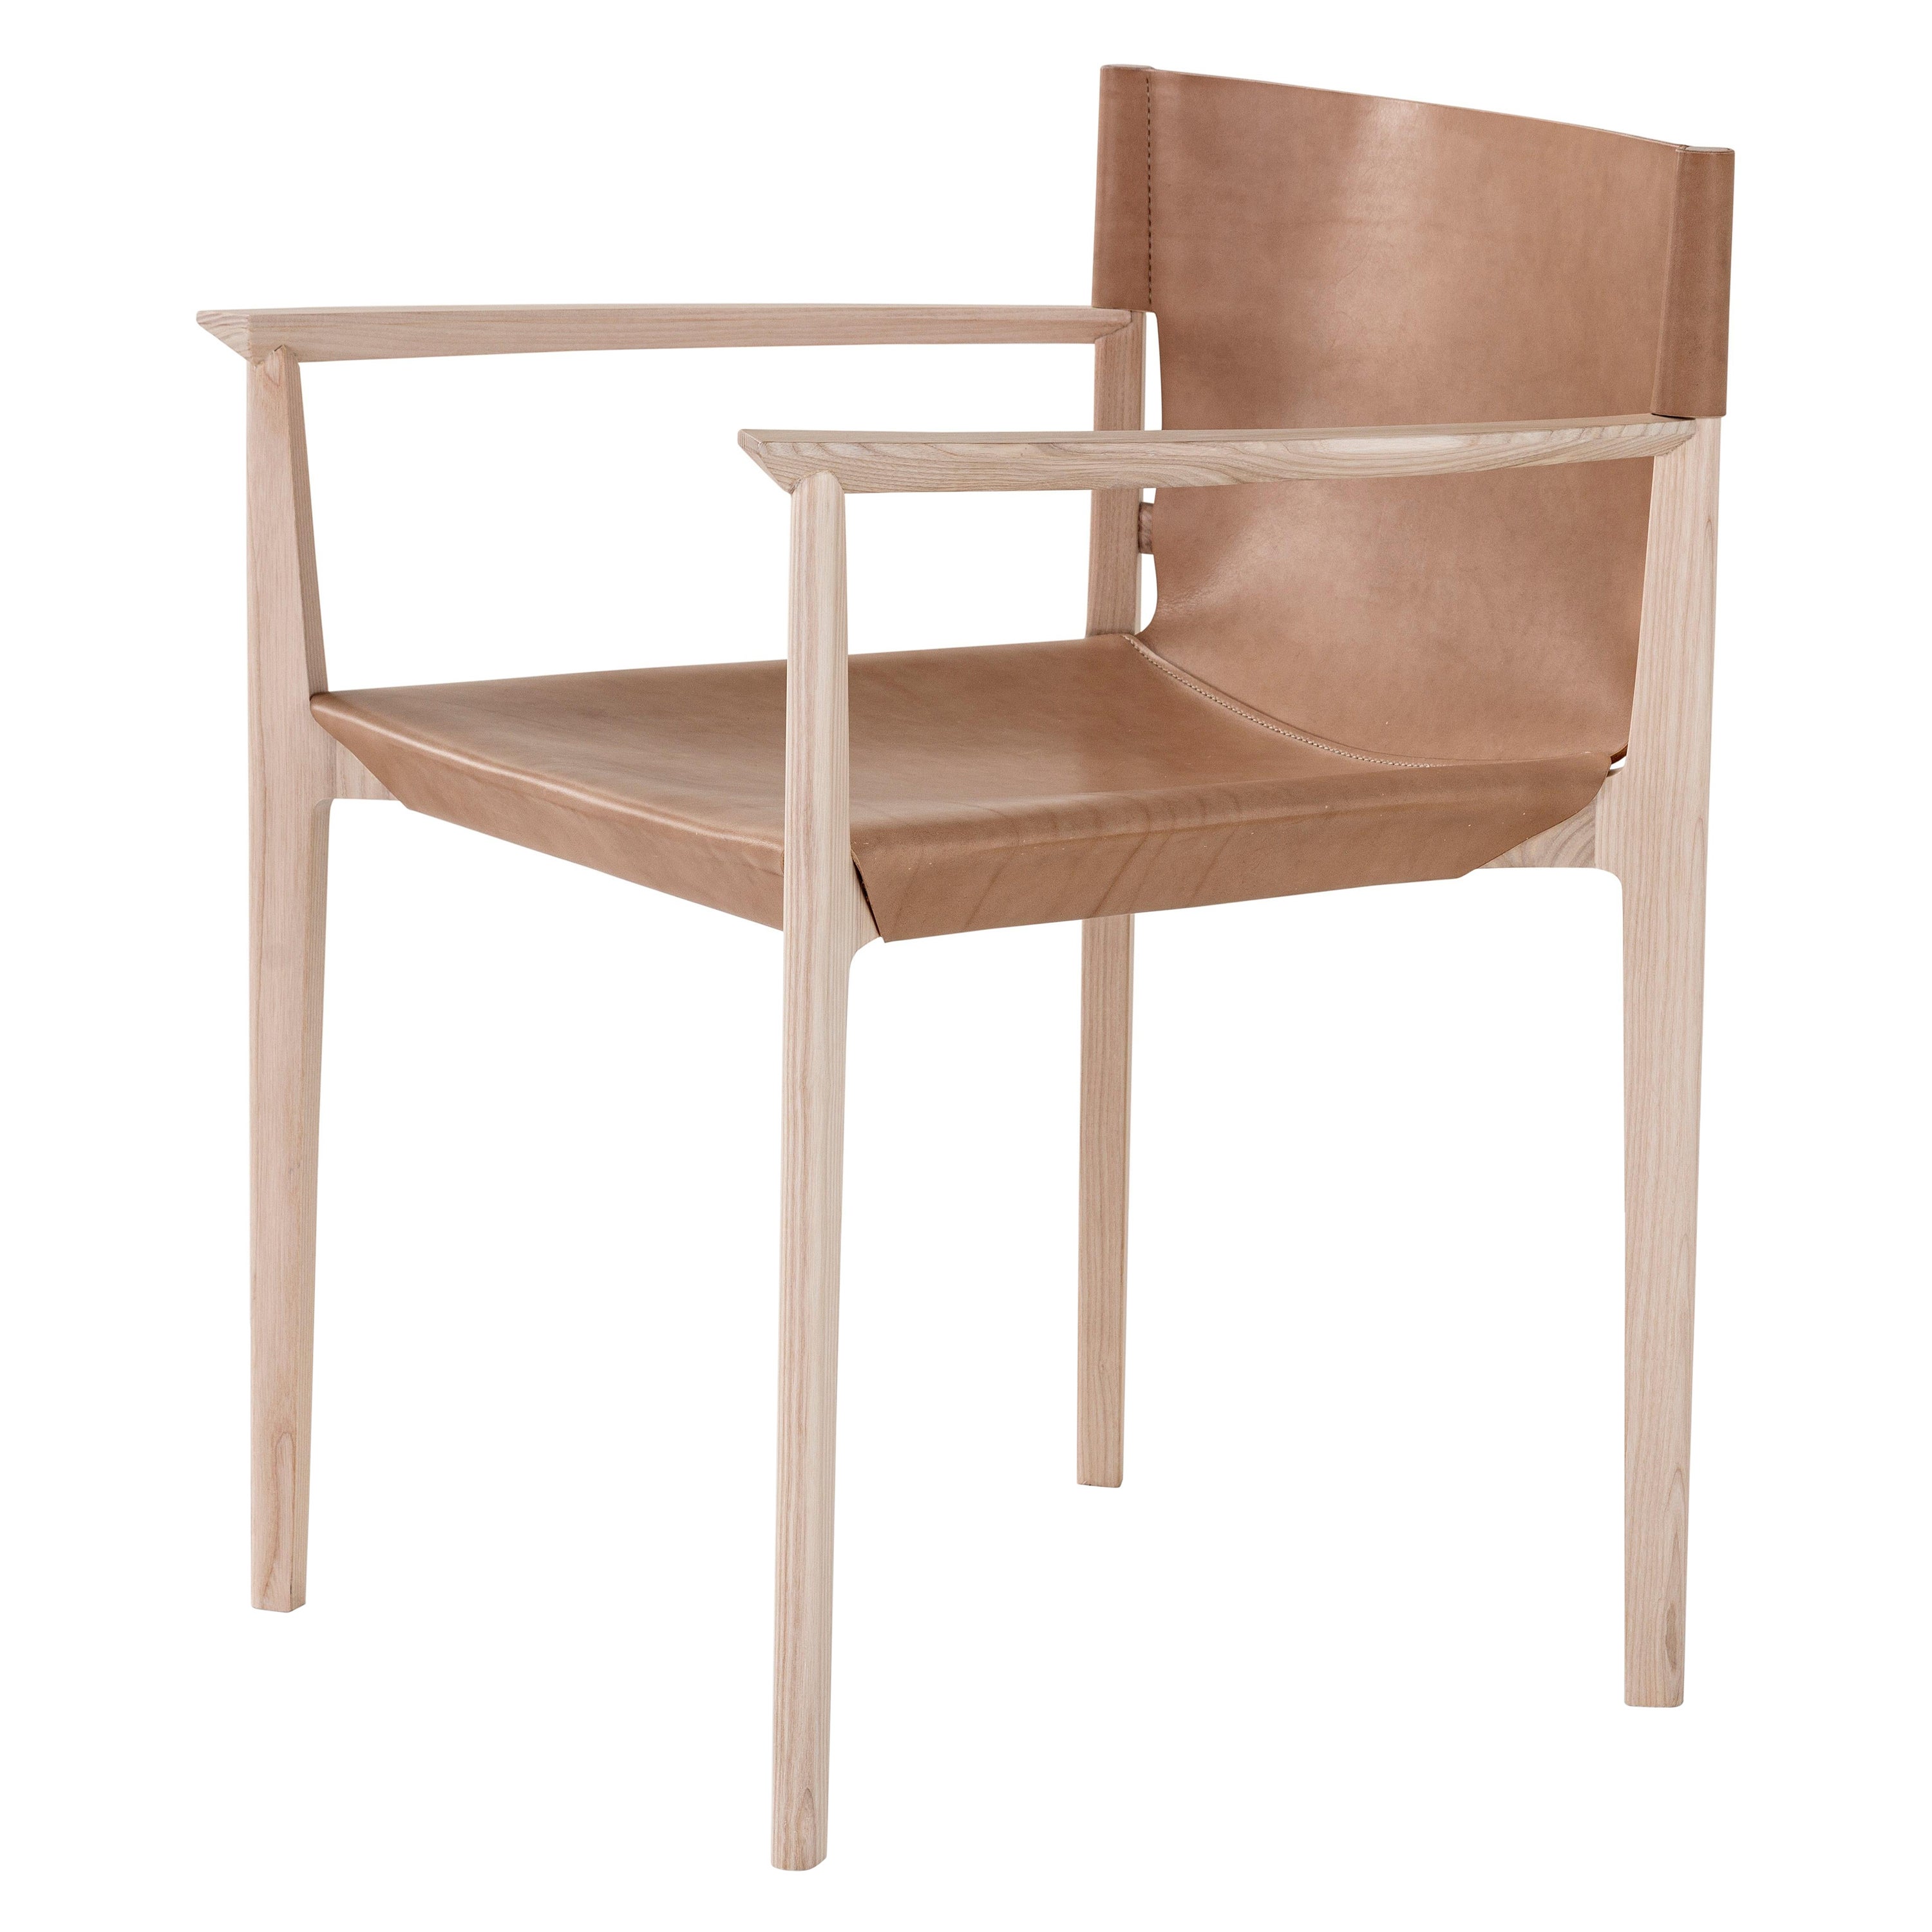 Contemporary Wooden Chair 'Stilt', Cuoio For Sale